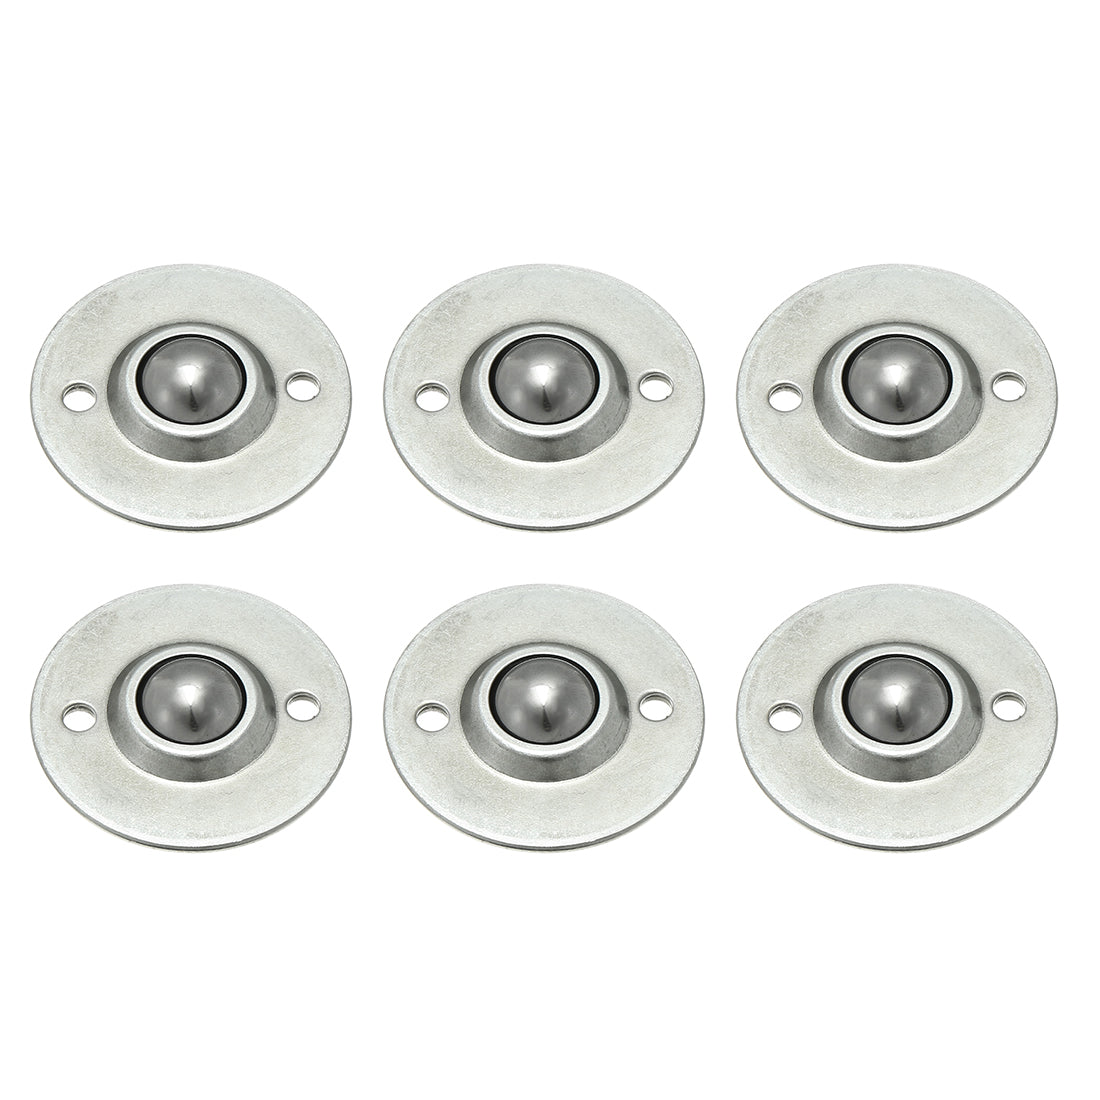 uxcell Uxcell 6pcs CY-16B 5/8-inch Bearing Steel Roller Ball Flange Conveyor Transfer Unit